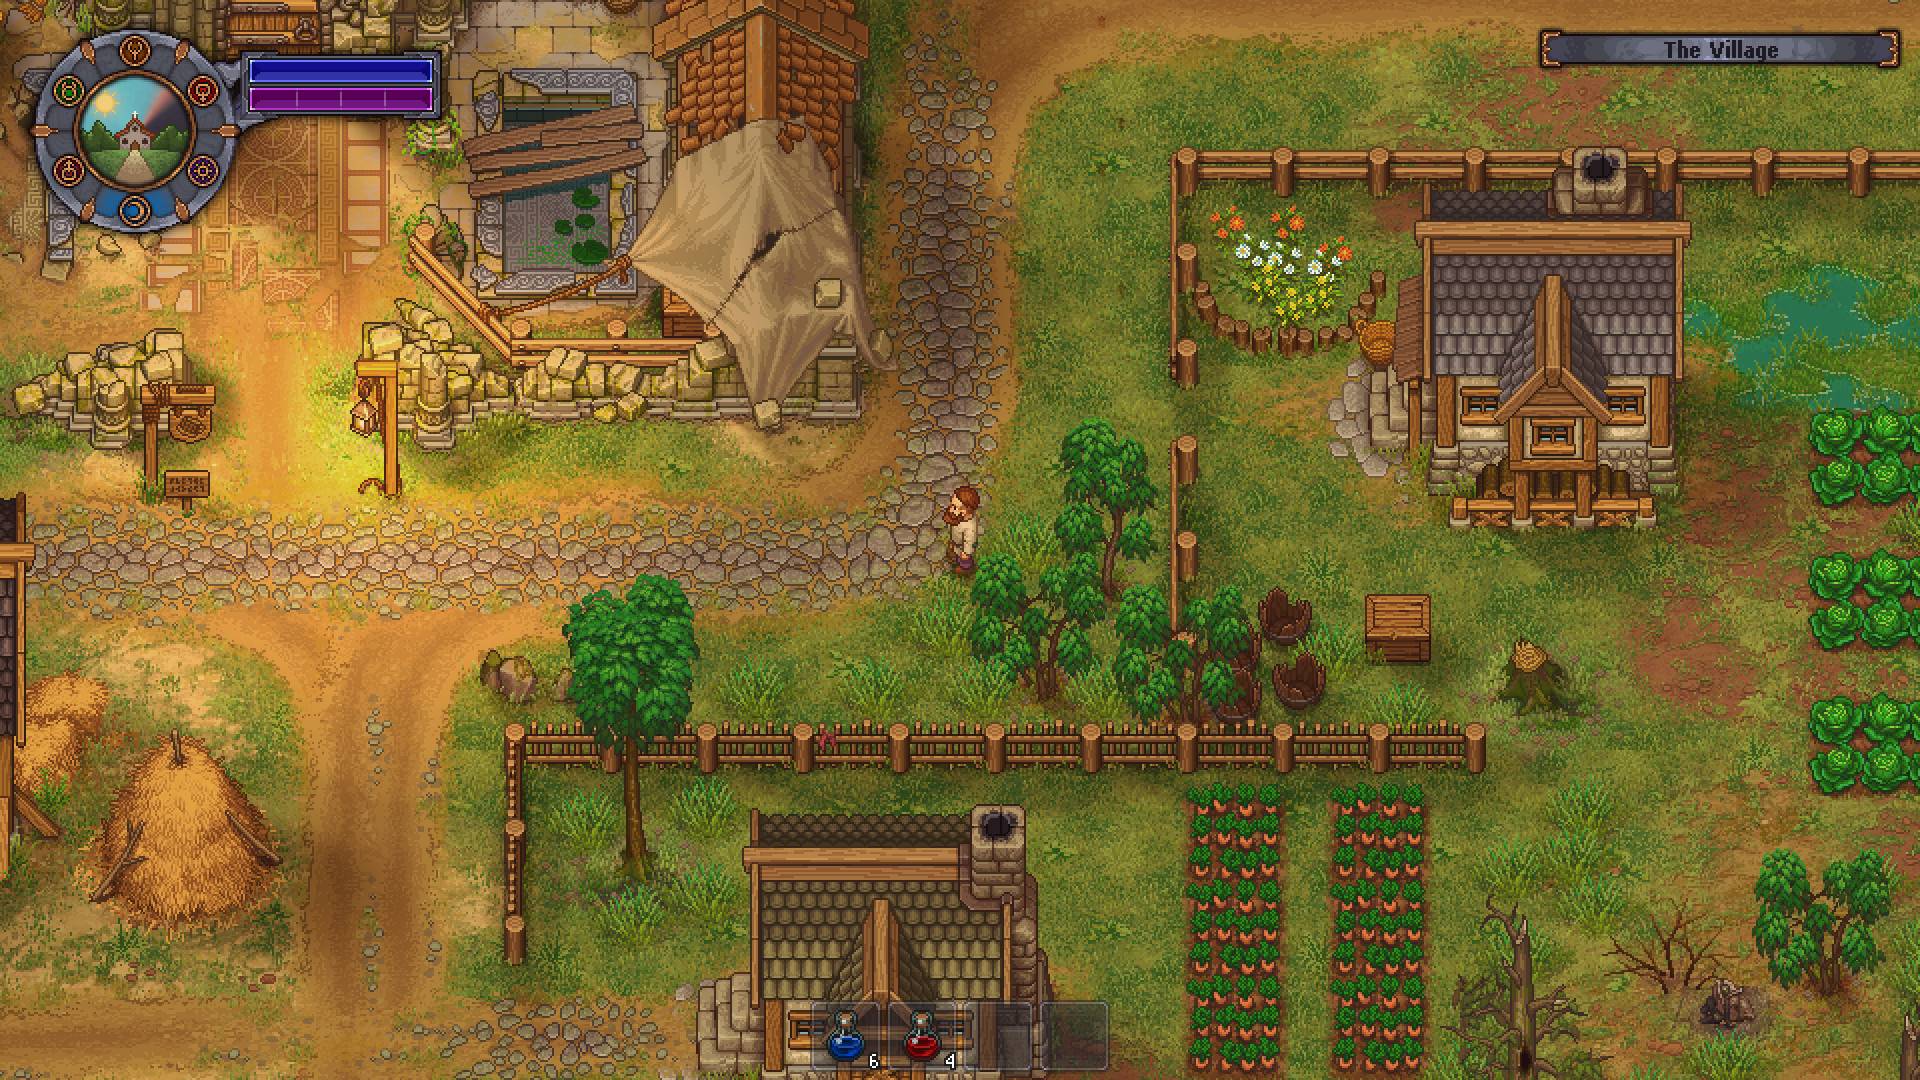 A pixelated scene shows a farmer tending to a large graveyard